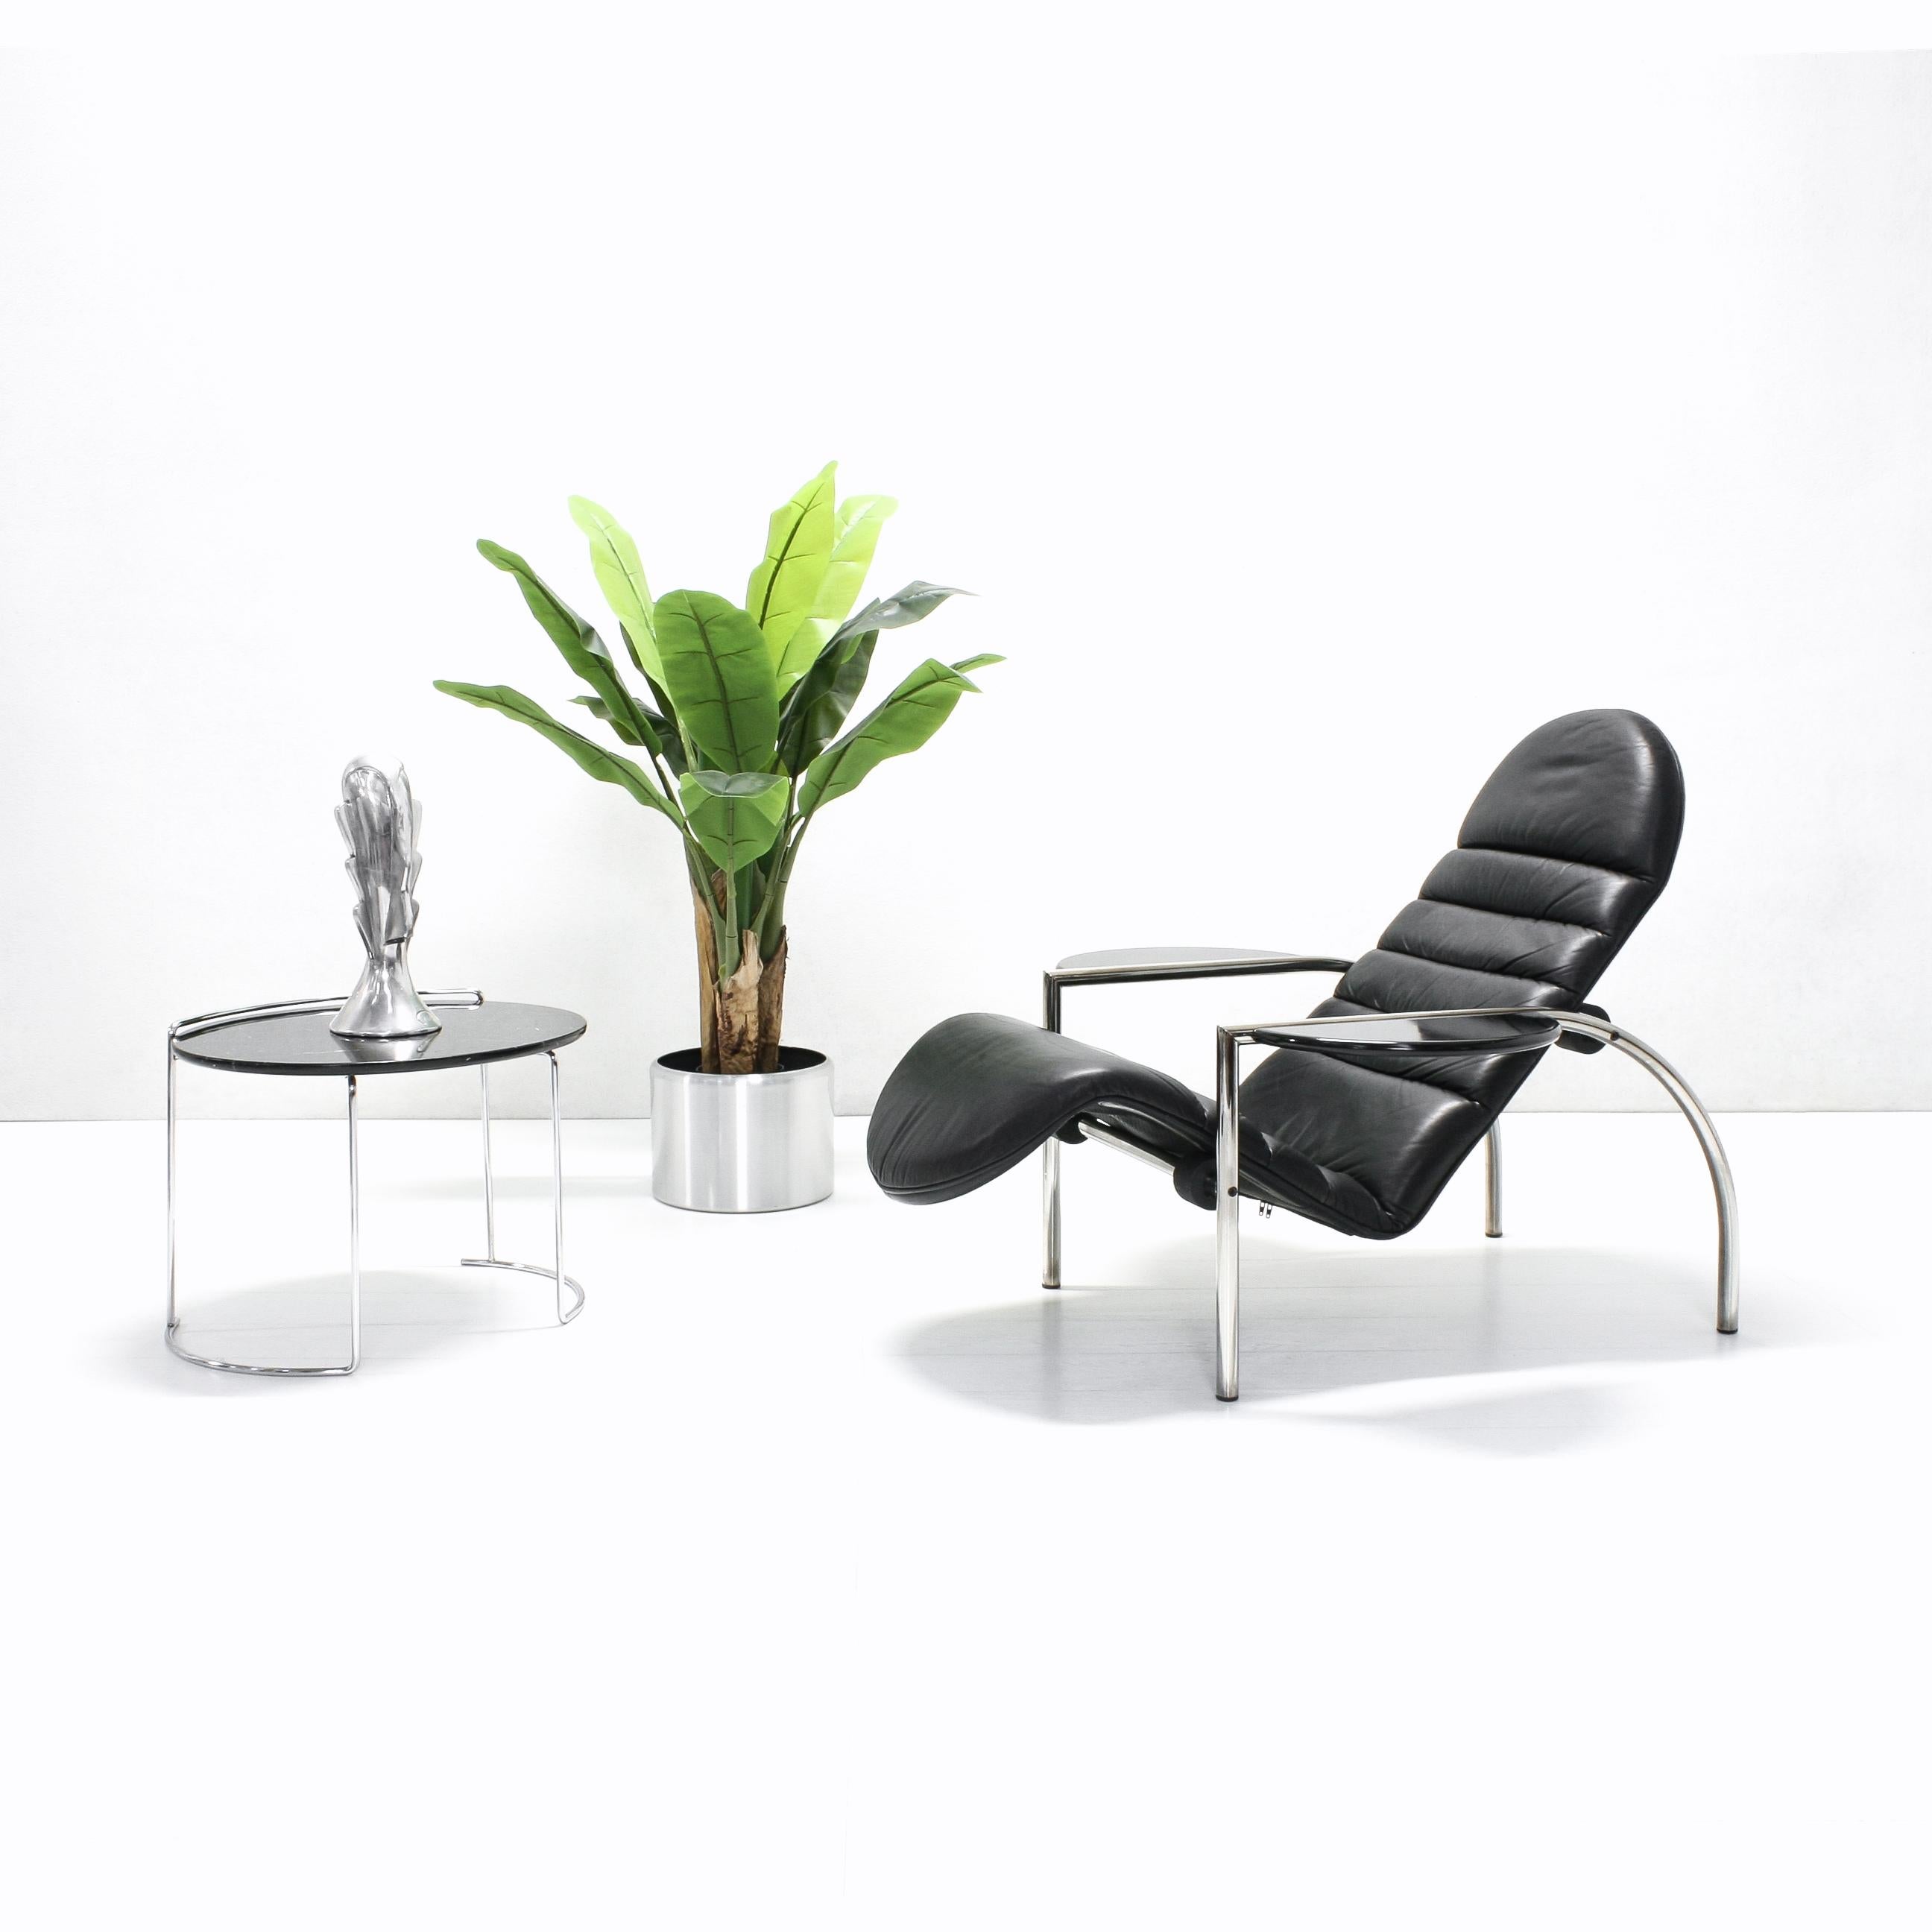 This model Noe chair features a chromed metal tube frame with a black leather seat and black lacquered wooden armrests that can function easily as tables. Thanks to a simple, yet functional roller system, the chair can be used for both sitting as